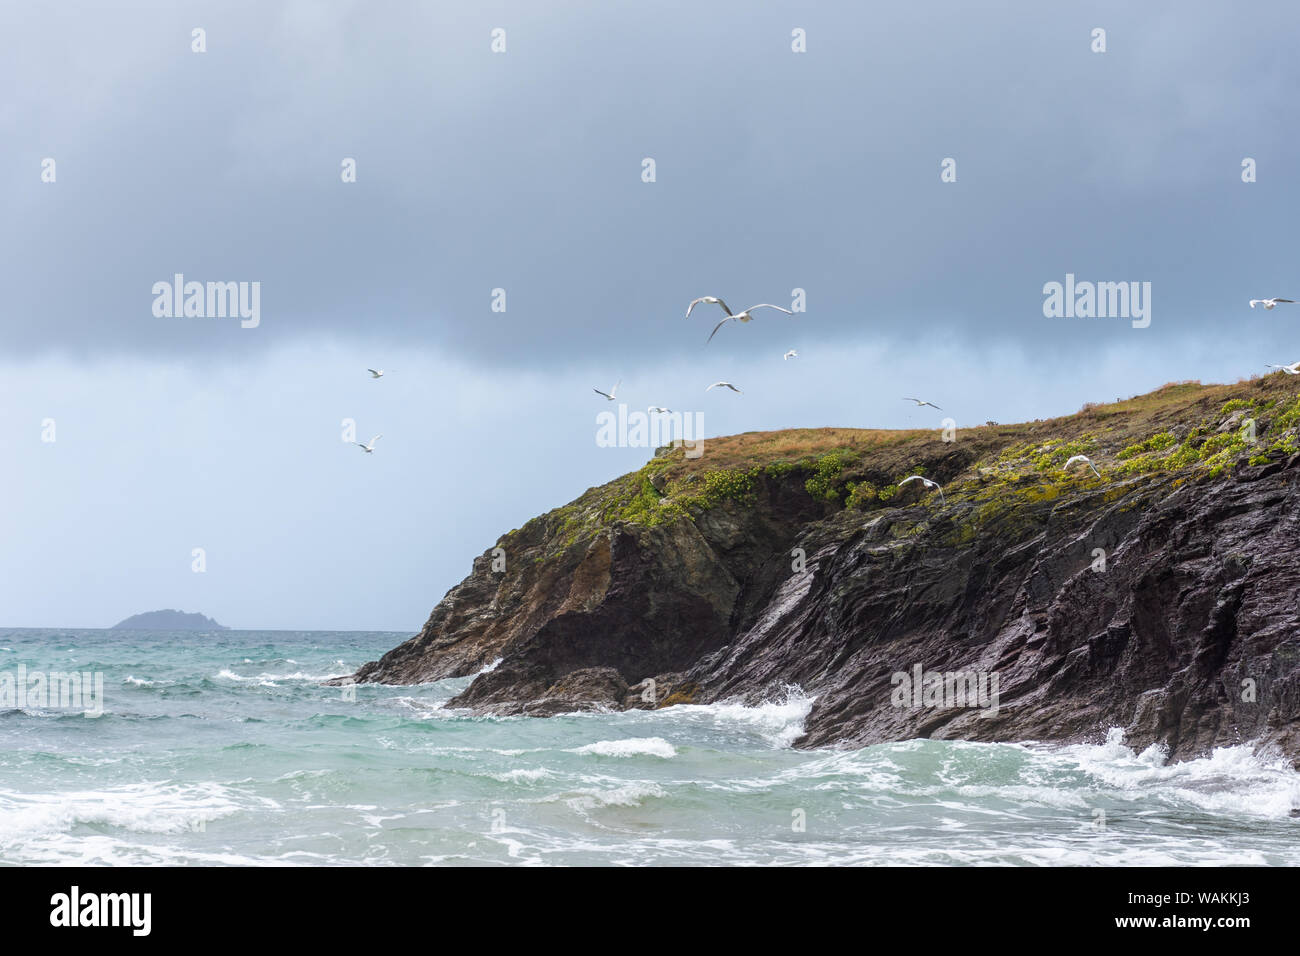 Seagulls flying over cliffs, North Cornwall, UK Stock Photo